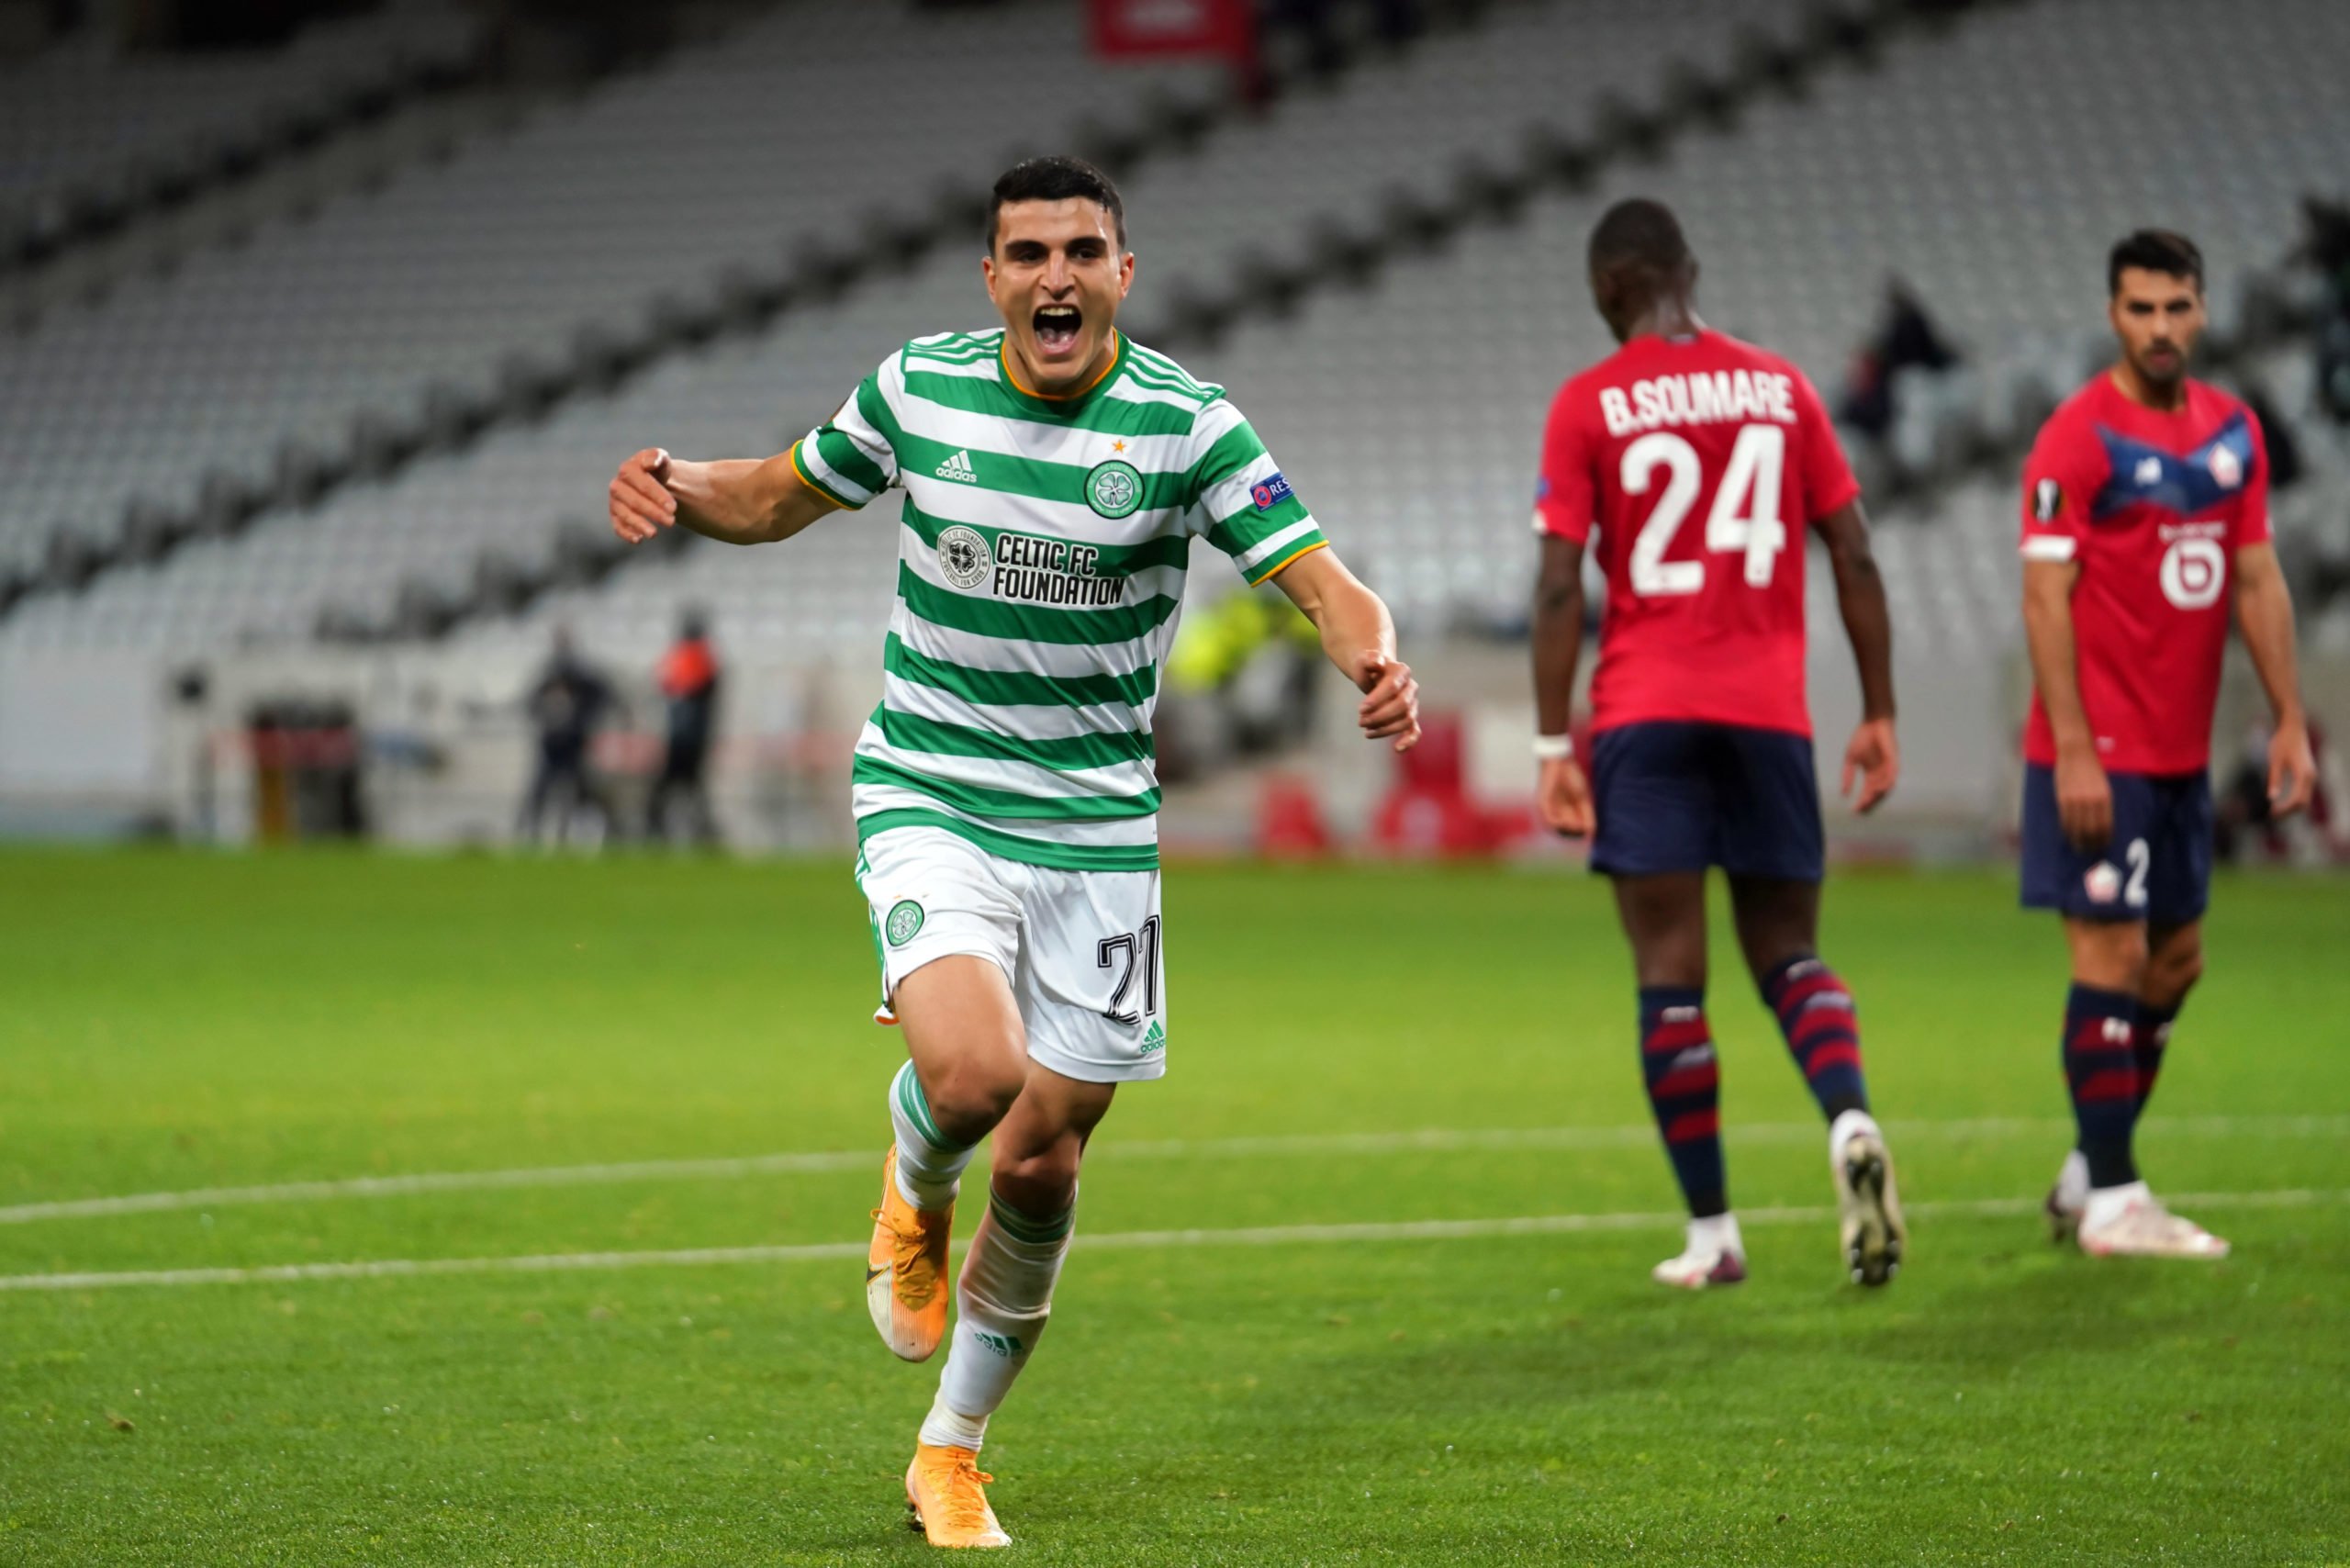 Ralph Hasenhuttl doesn't want Celtic star Moi Elyounoussi back; suits us fine